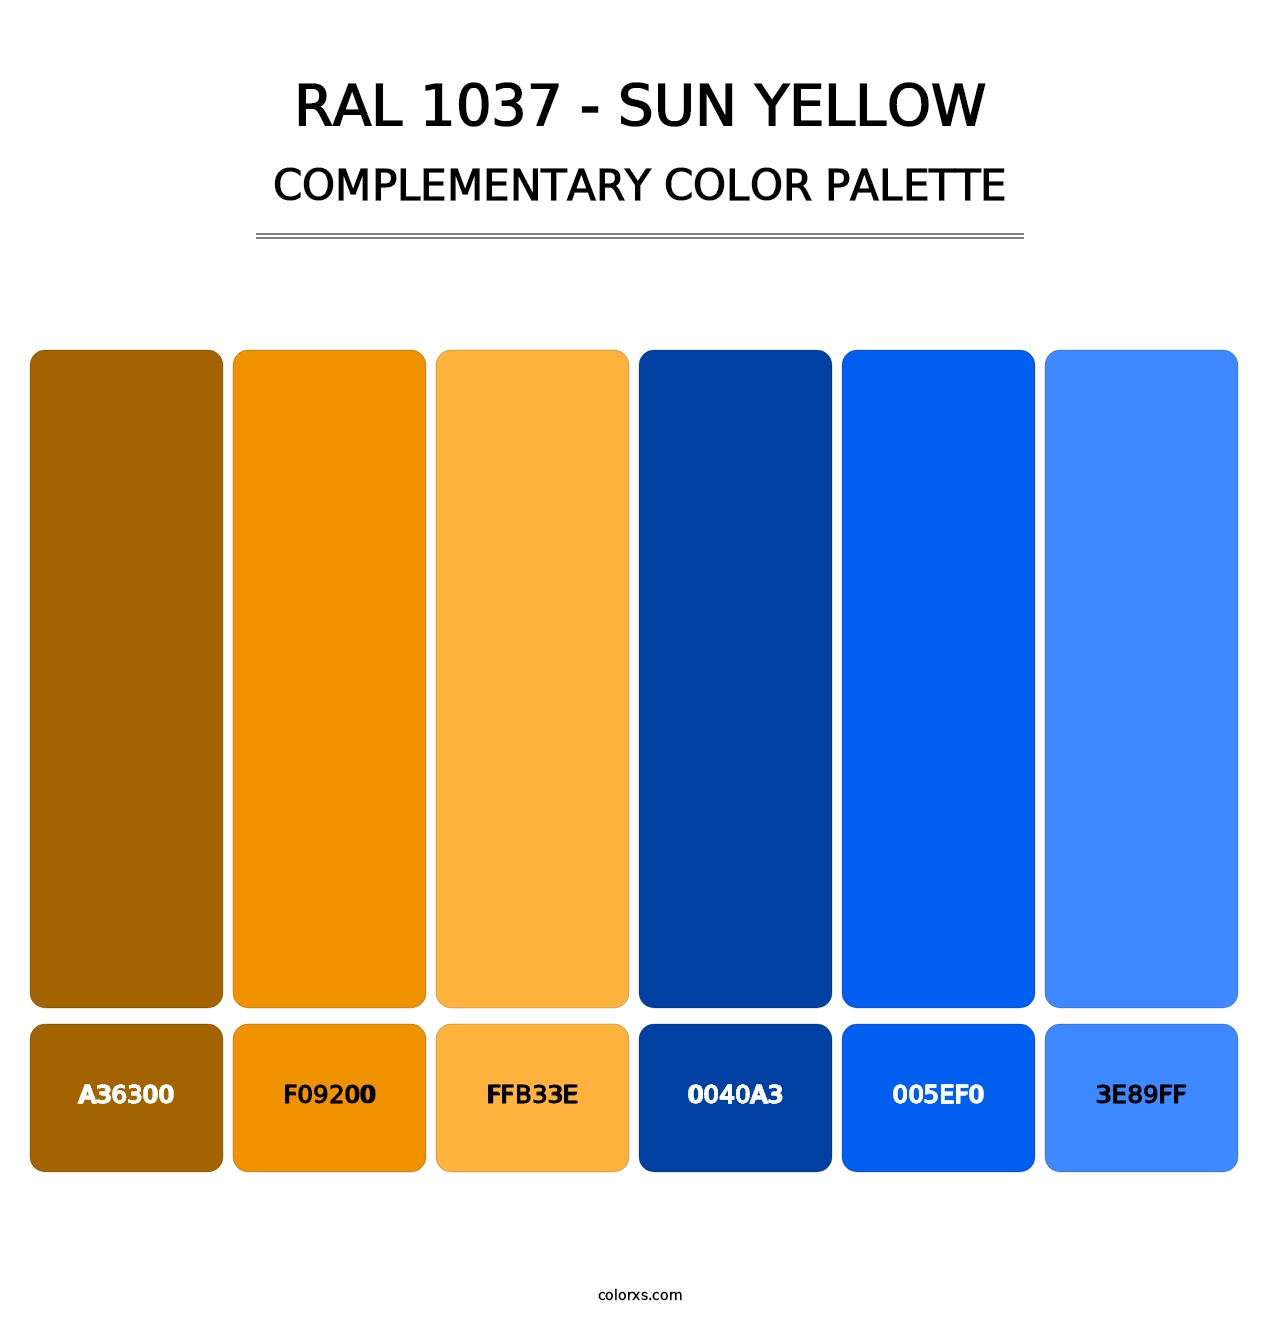 RAL 1037 - Sun Yellow - Complementary Color Palette